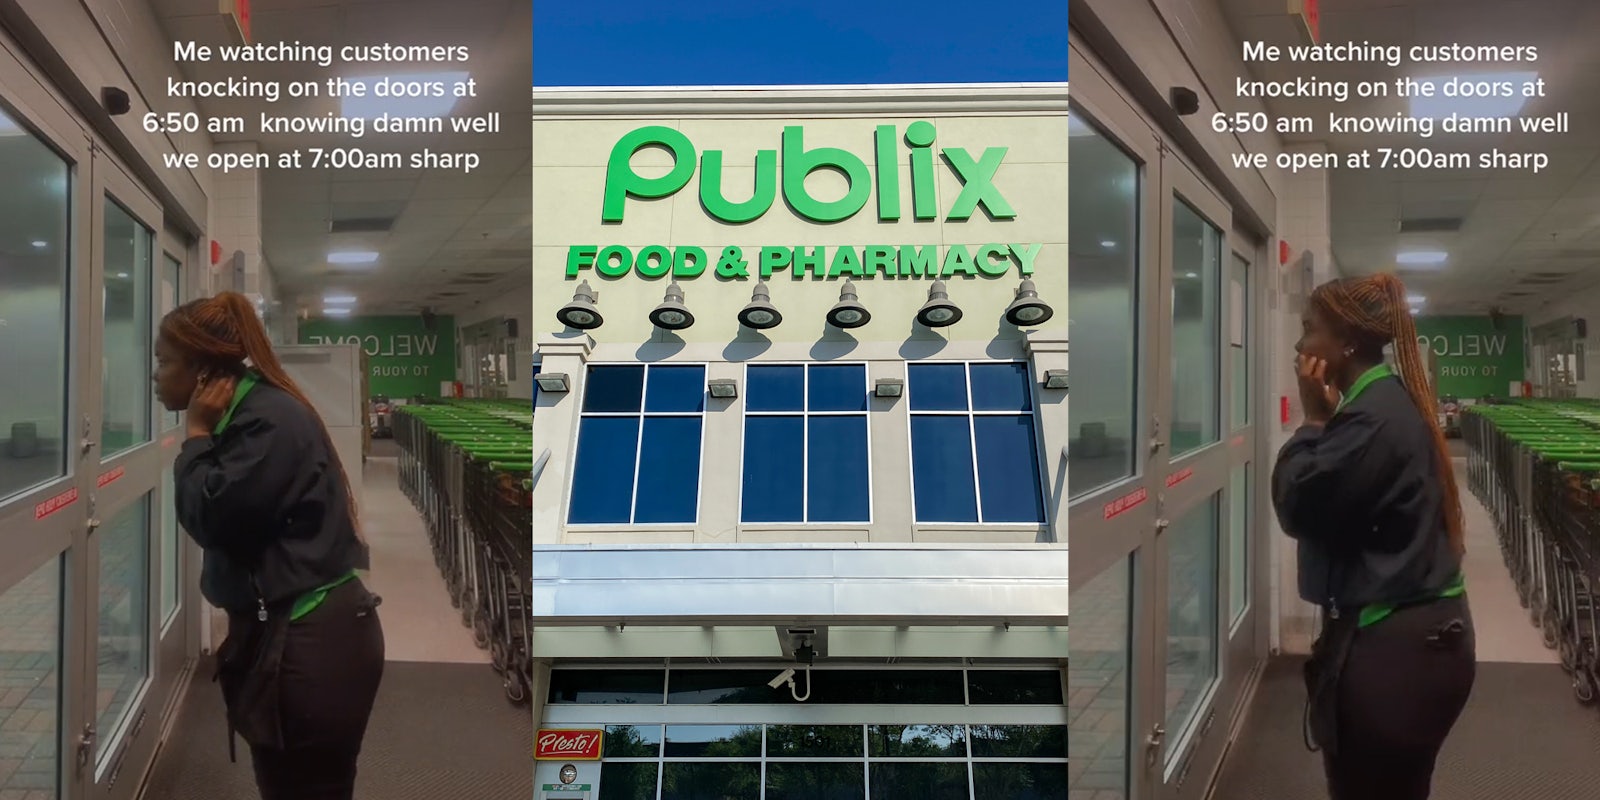 Publix employee at door with caption 'Me watching customers knocking on the doors at 6:50 am knowing damn well we open at 7:00am sharp' (l) Publix sign on building (c) Publix employee at door with caption 'Me watching customers knocking on the doors at 6:50 am knowing damn well we open at 7:00am sharp' (r)